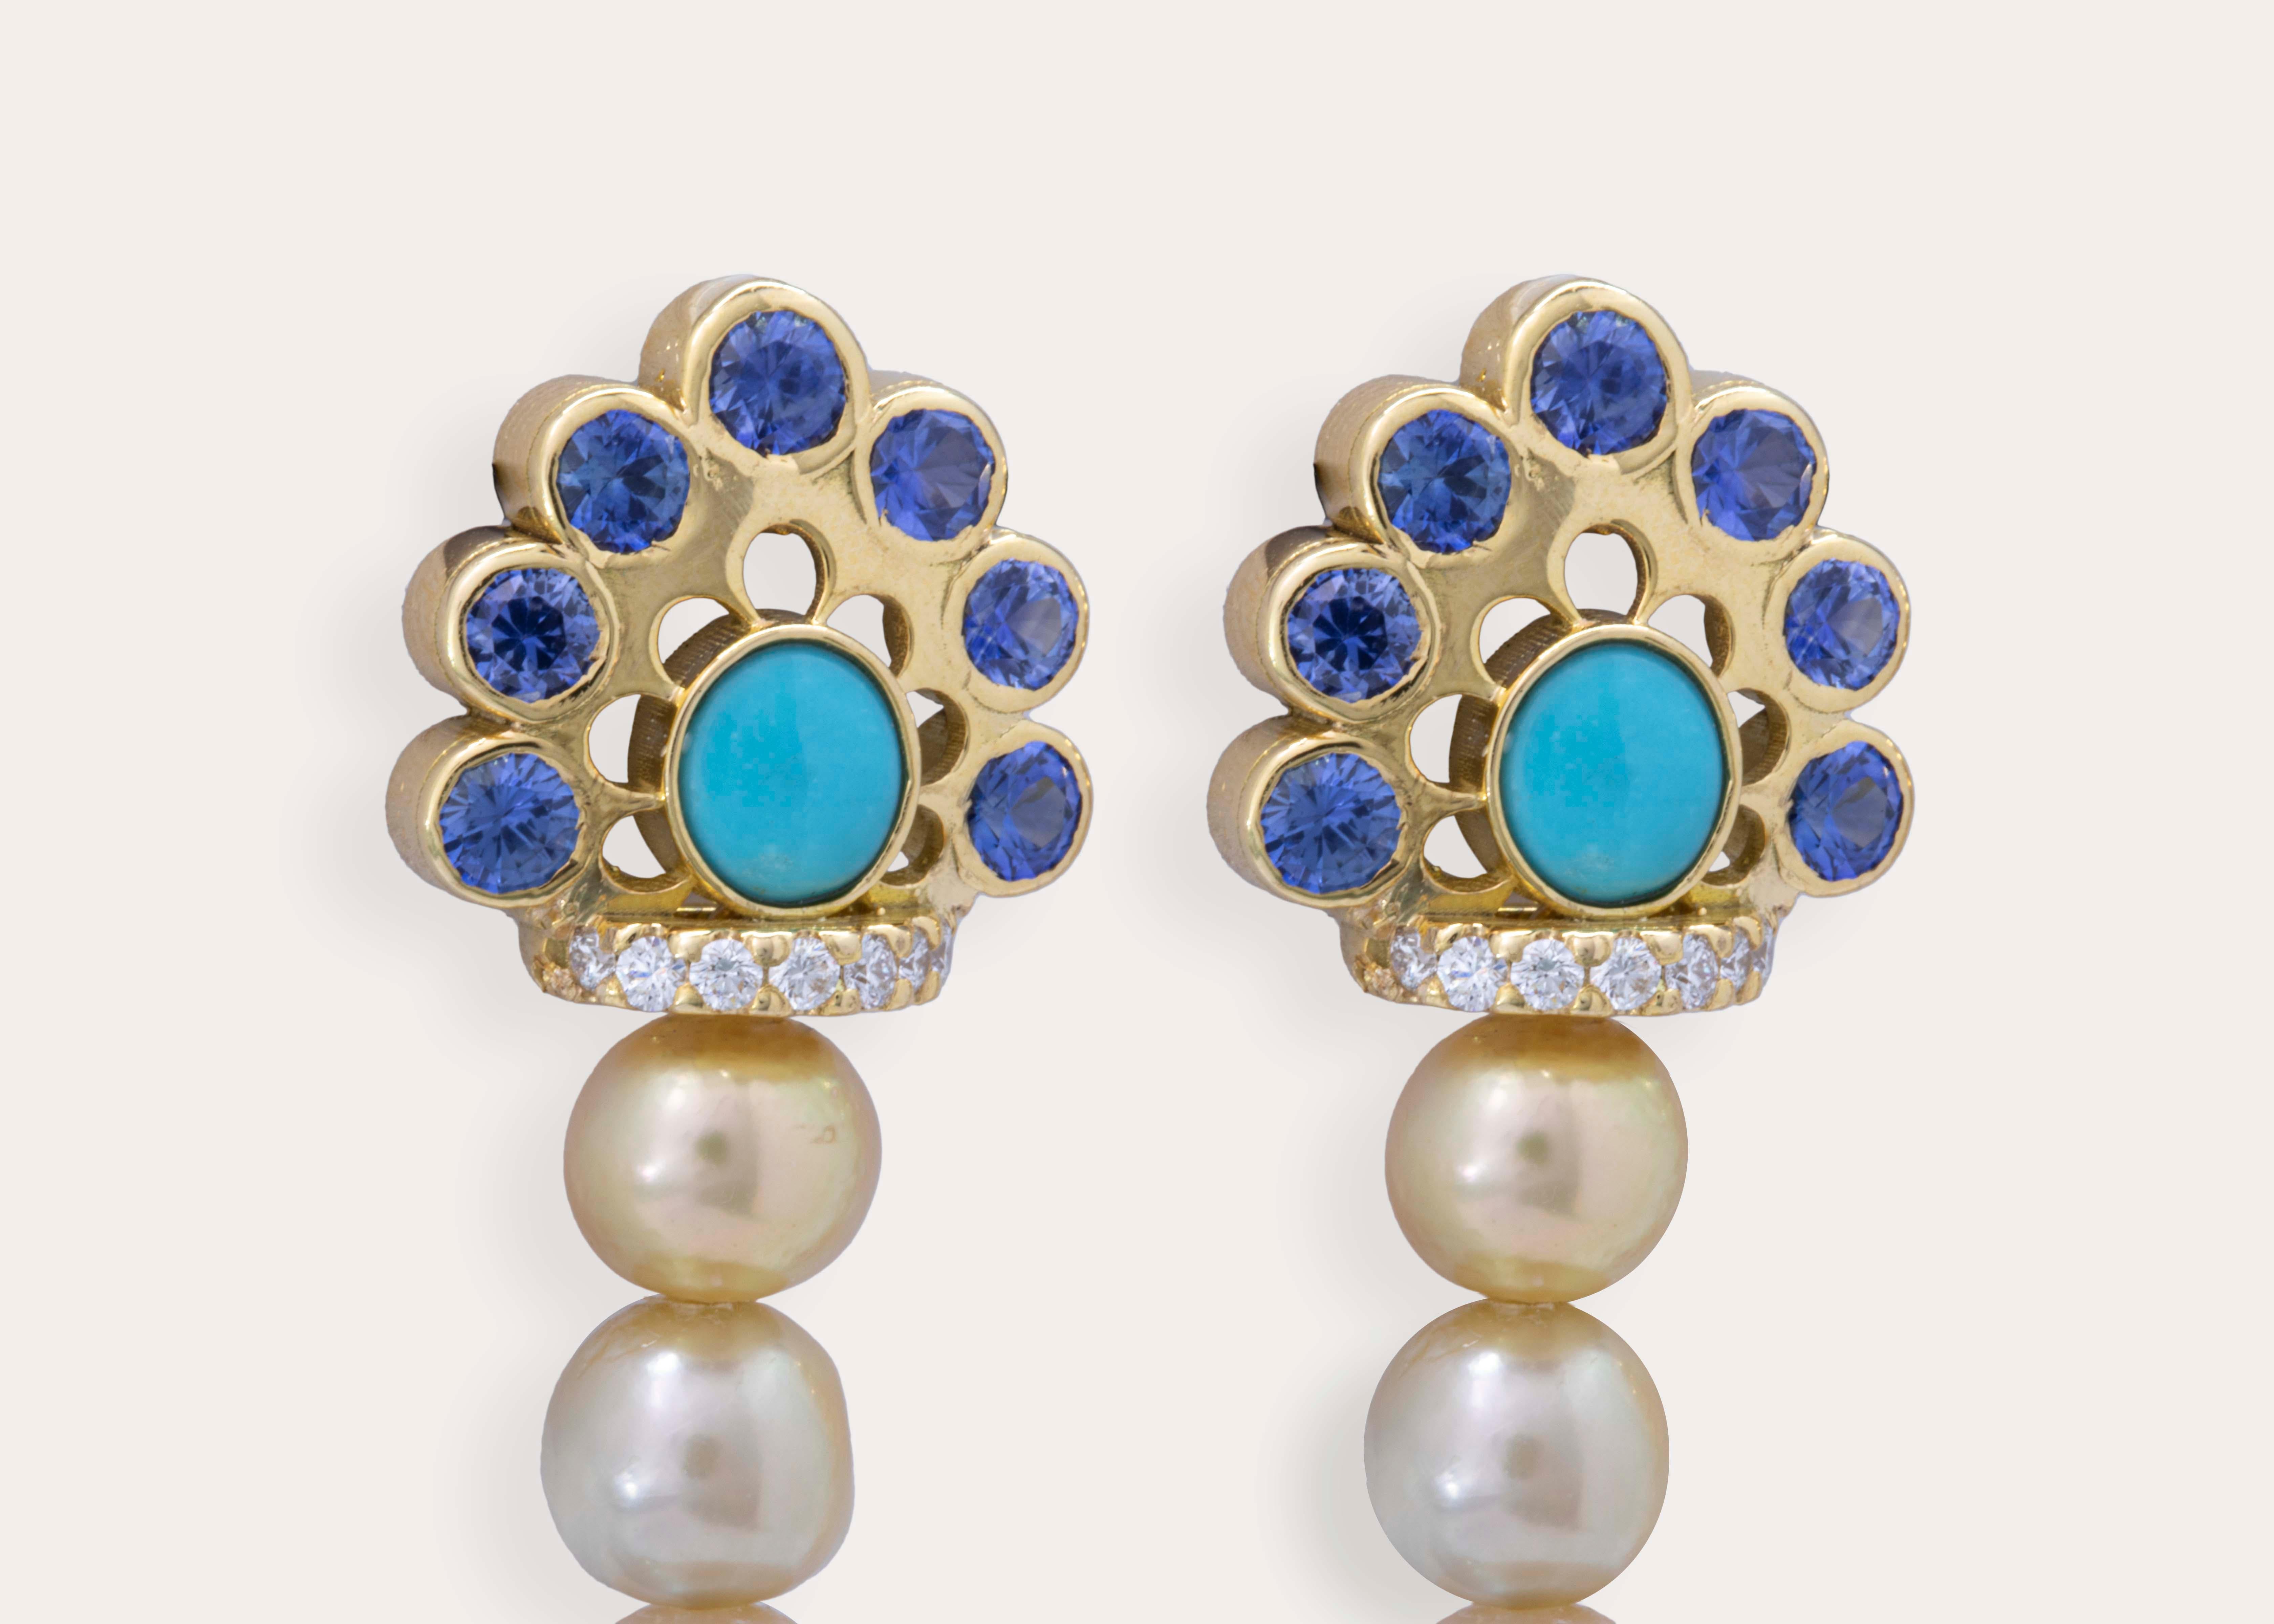 Mixed Cut Certified 14 Ct. Natural Pearls 18k Earrings w/ Rubies, Turquoise & Sapphires For Sale